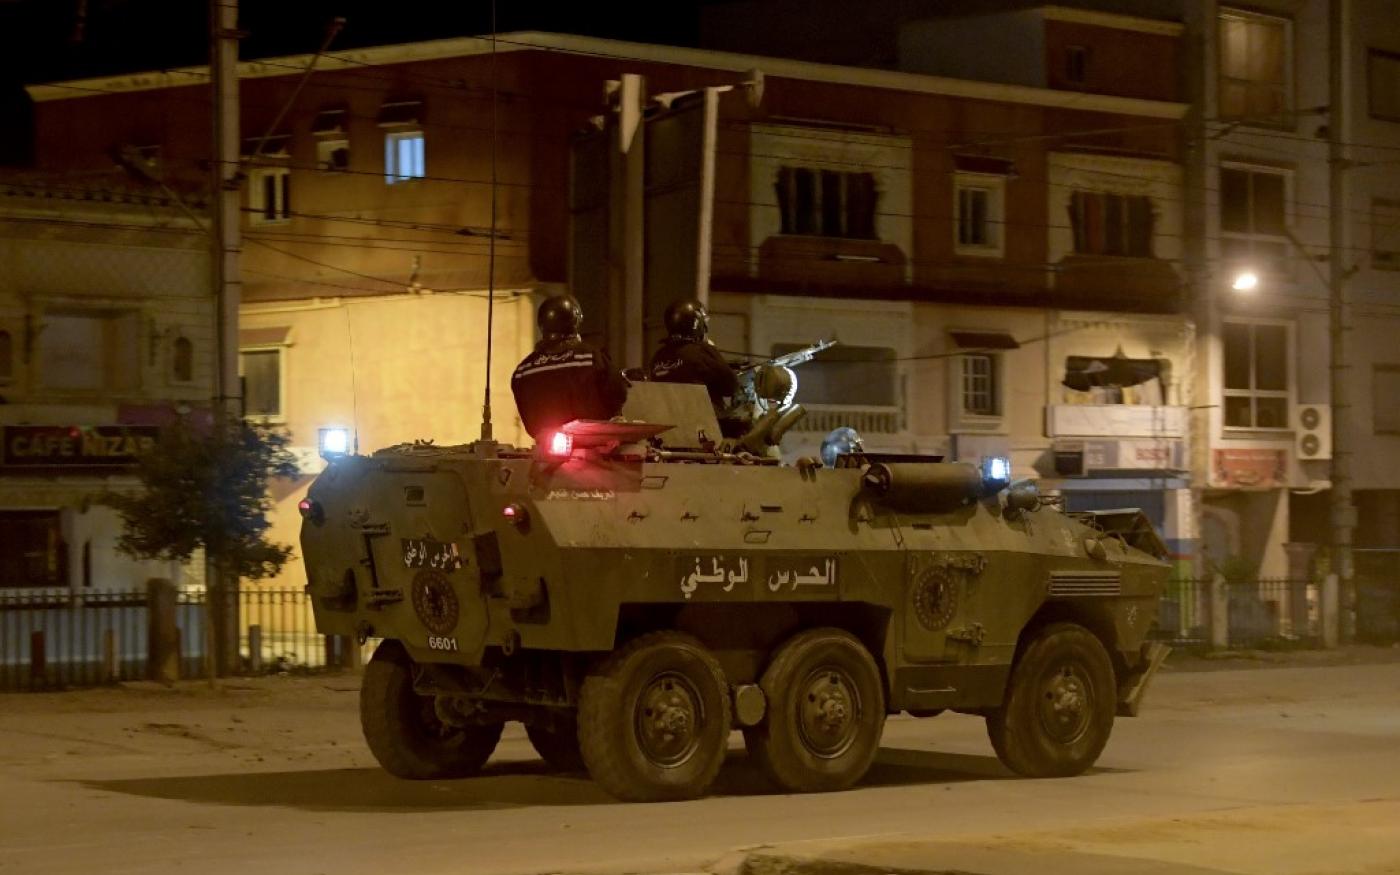 Photo legend: Members of the Tunisian National Guard in their armoured vehicle amid the clashes between protectors in Ettadhamen district, Tunis, on 17th January 2021 (AFP)